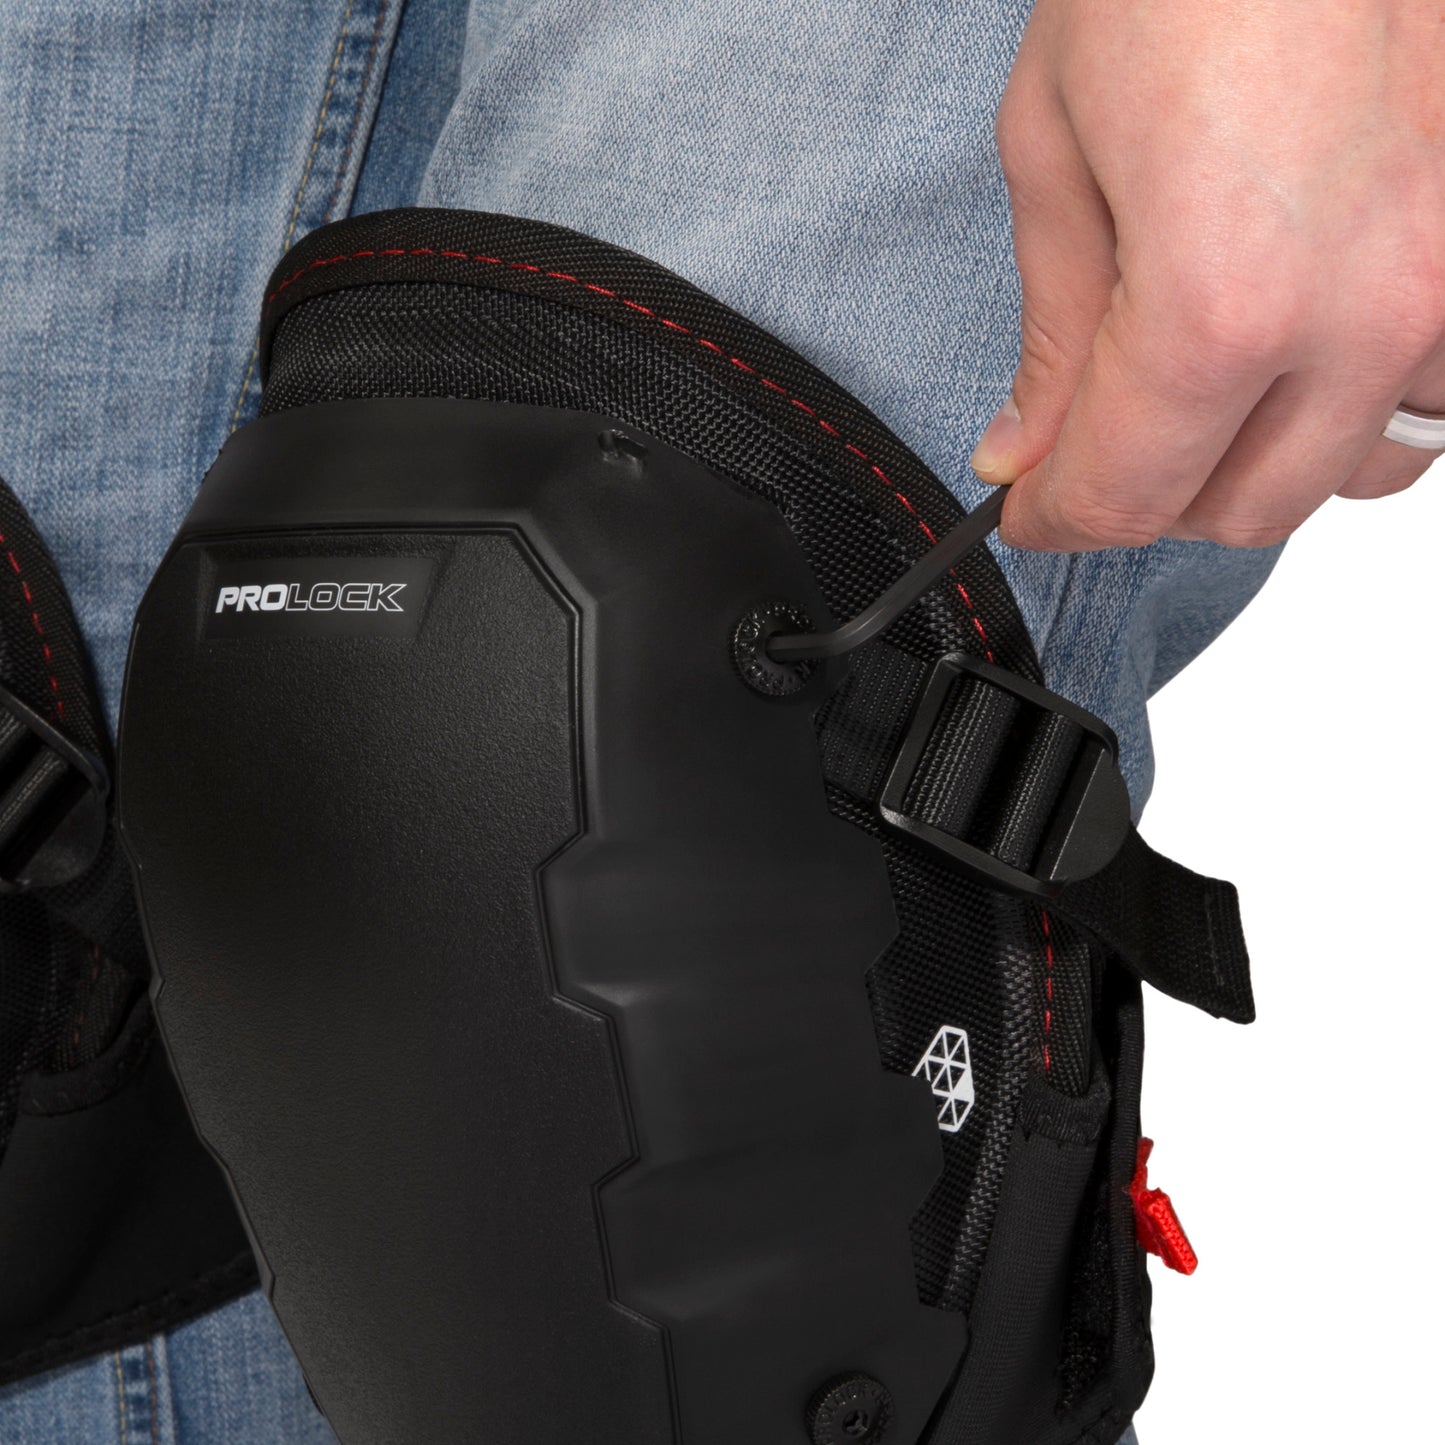 2-Piece Foam Knee Pad and Hard Cap Attachment Combo Pack